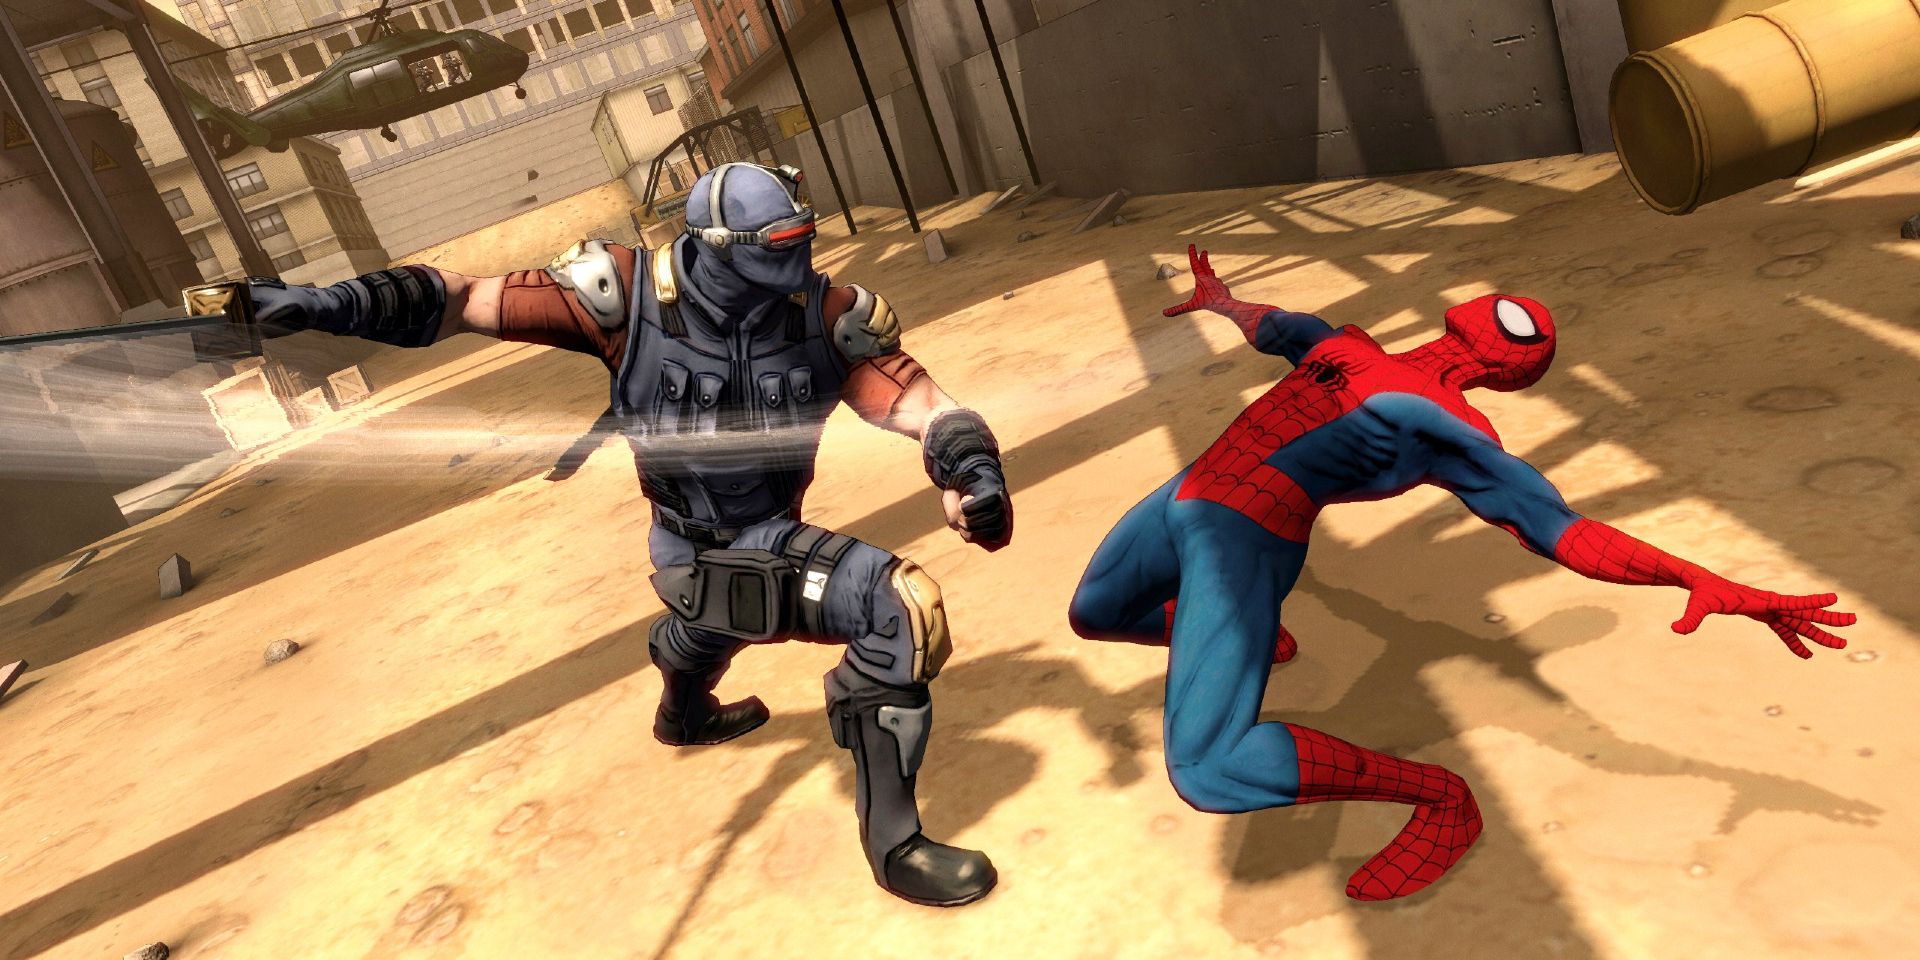 Spider-Man utilizes his flexibility to dodge an enemy's attack in Spider-Man Shattered Dimensions